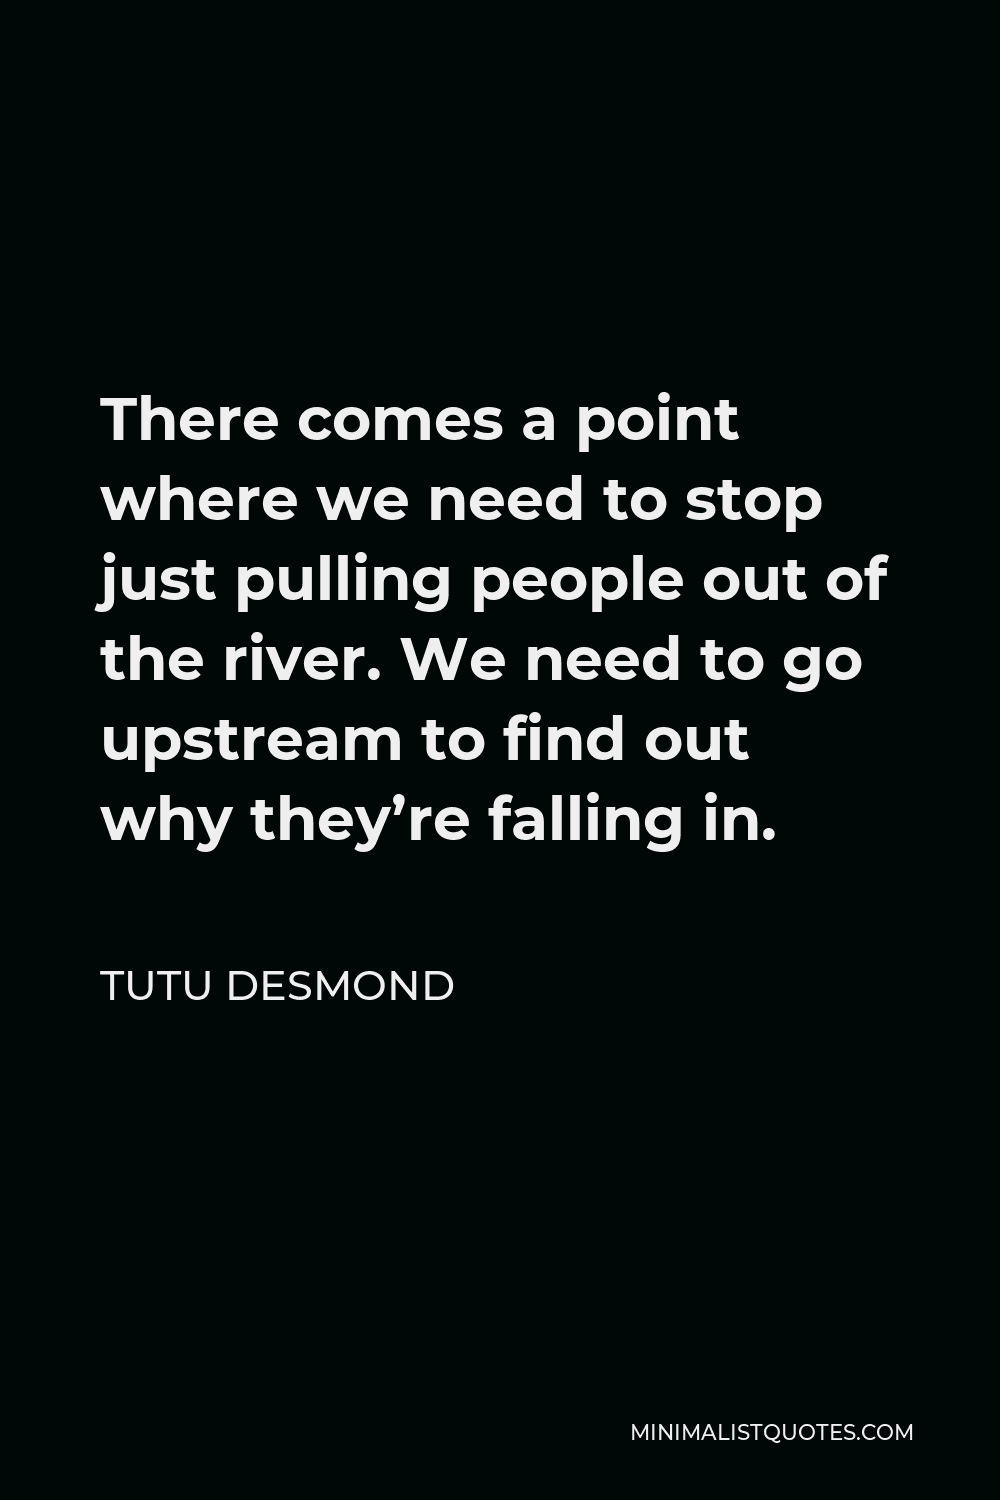 Tutu Desmond Quote There Comes A Point Where We Need To Stop Just Pulling People Out Of The River We Need To Go Upstream To Find Out Why They Re Falling In